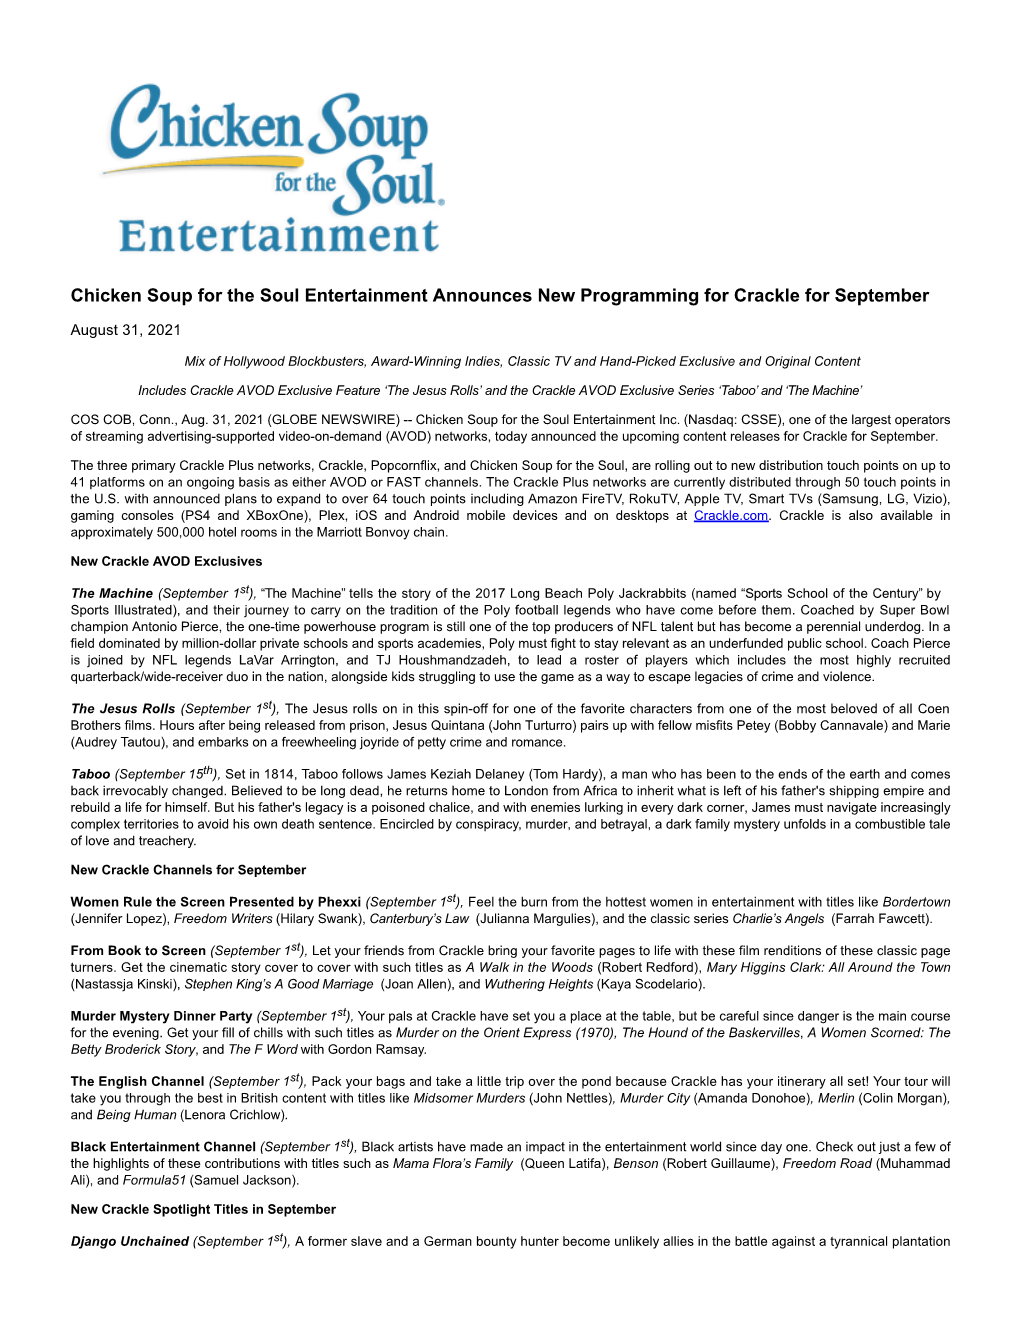 Chicken Soup for the Soul Entertainment Announces New Programming for Crackle for September